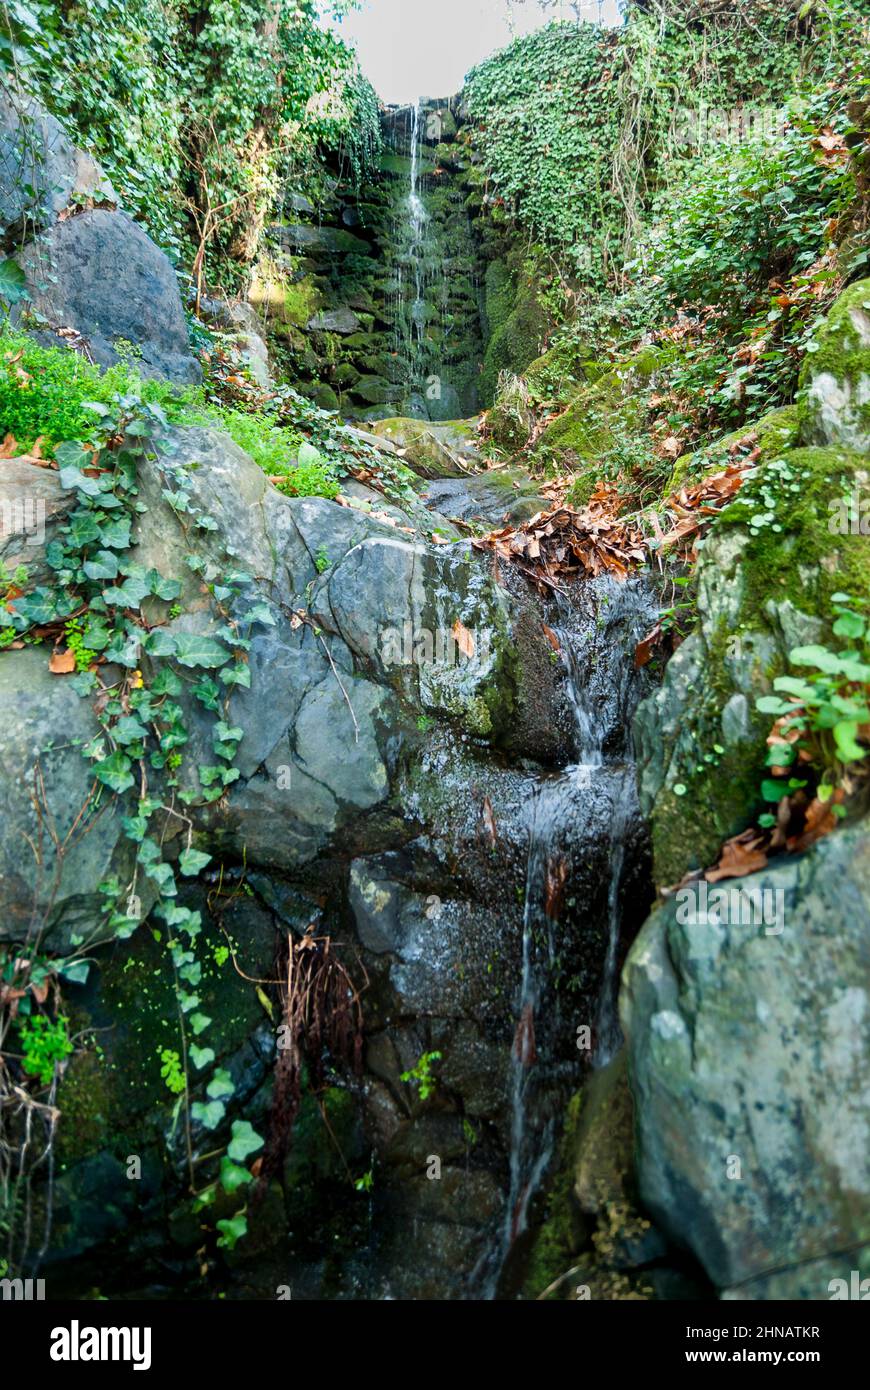 Typical corner with a small greenish waterfall with moss and green plants in Robledillo de Gata Stock Photo